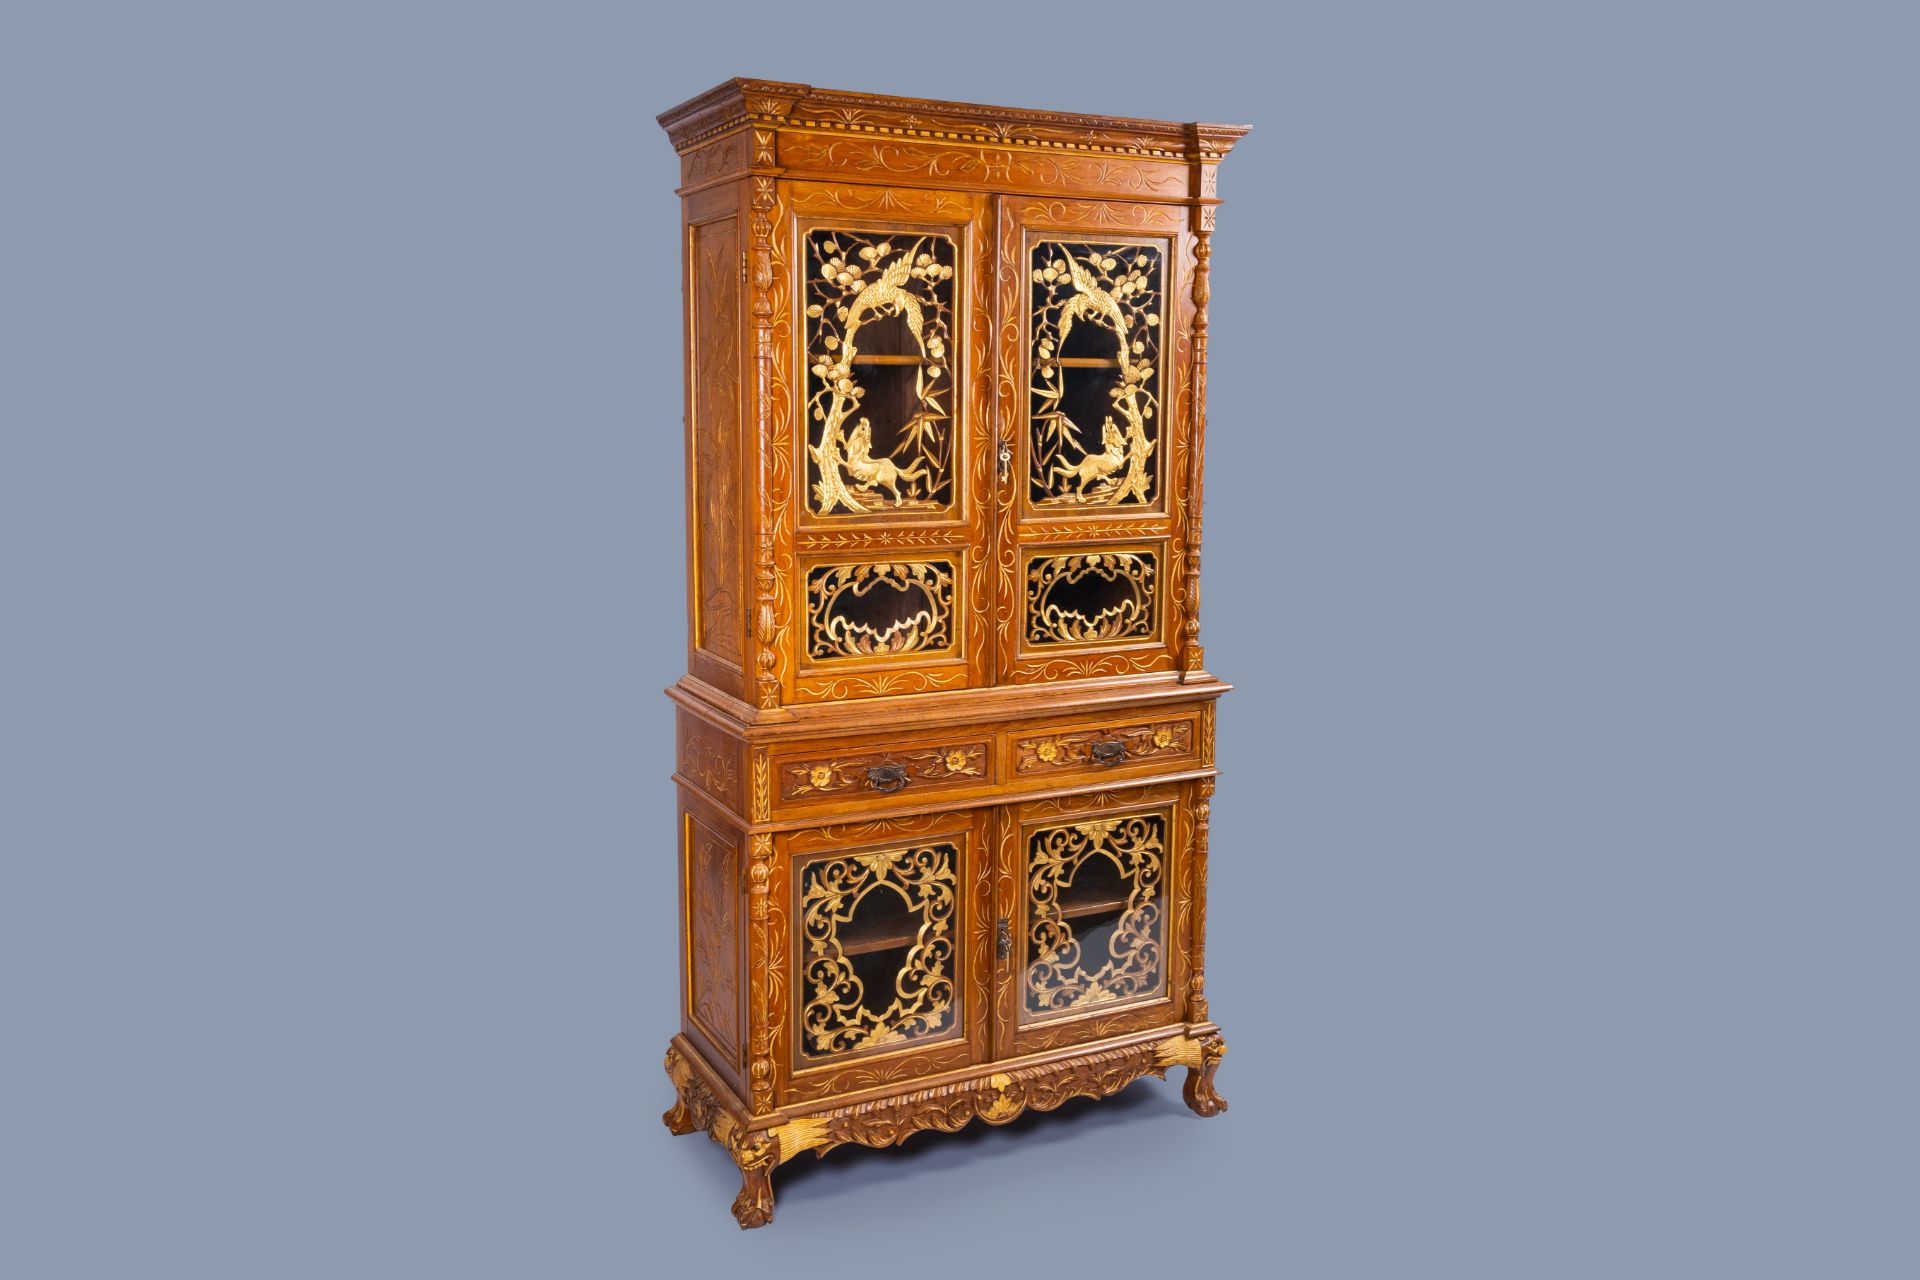 A Chinese Straits or Peranakan market gilt wood four-door cabinet, 19th C.